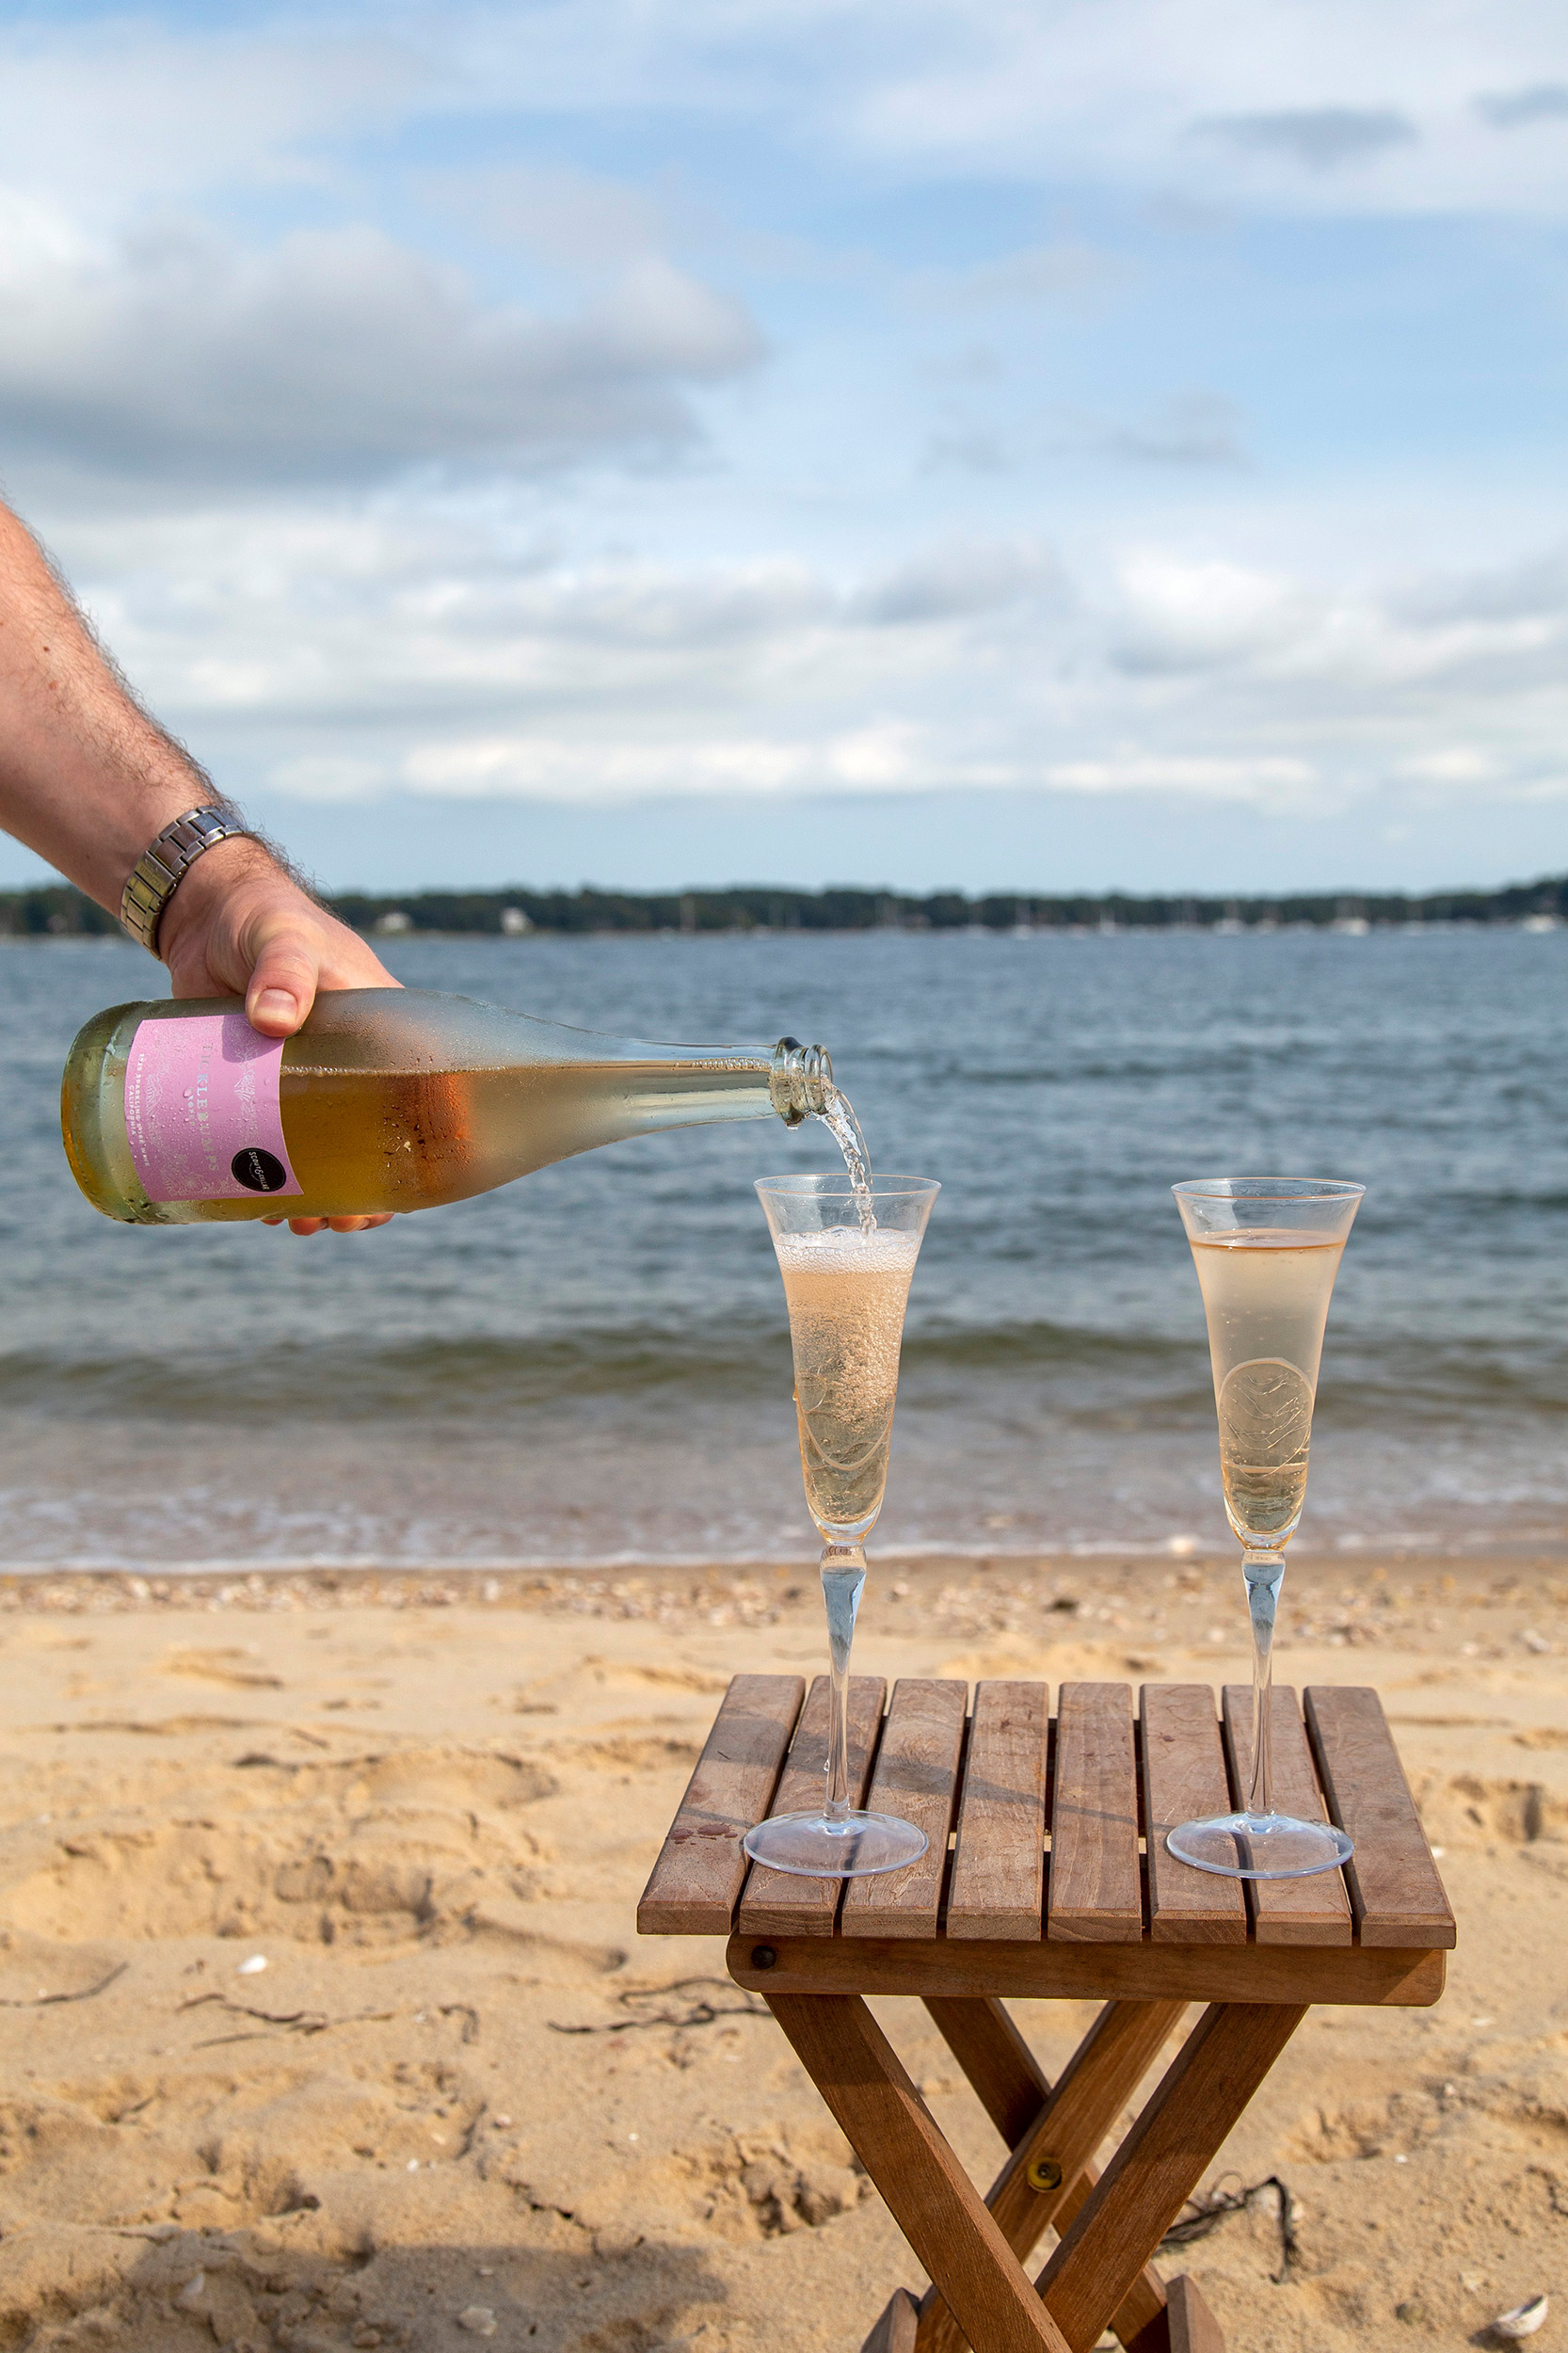 Two flute glasses on a small wooden table, with a bottle of wine being poured at the left side. On a beach with the sea in the background